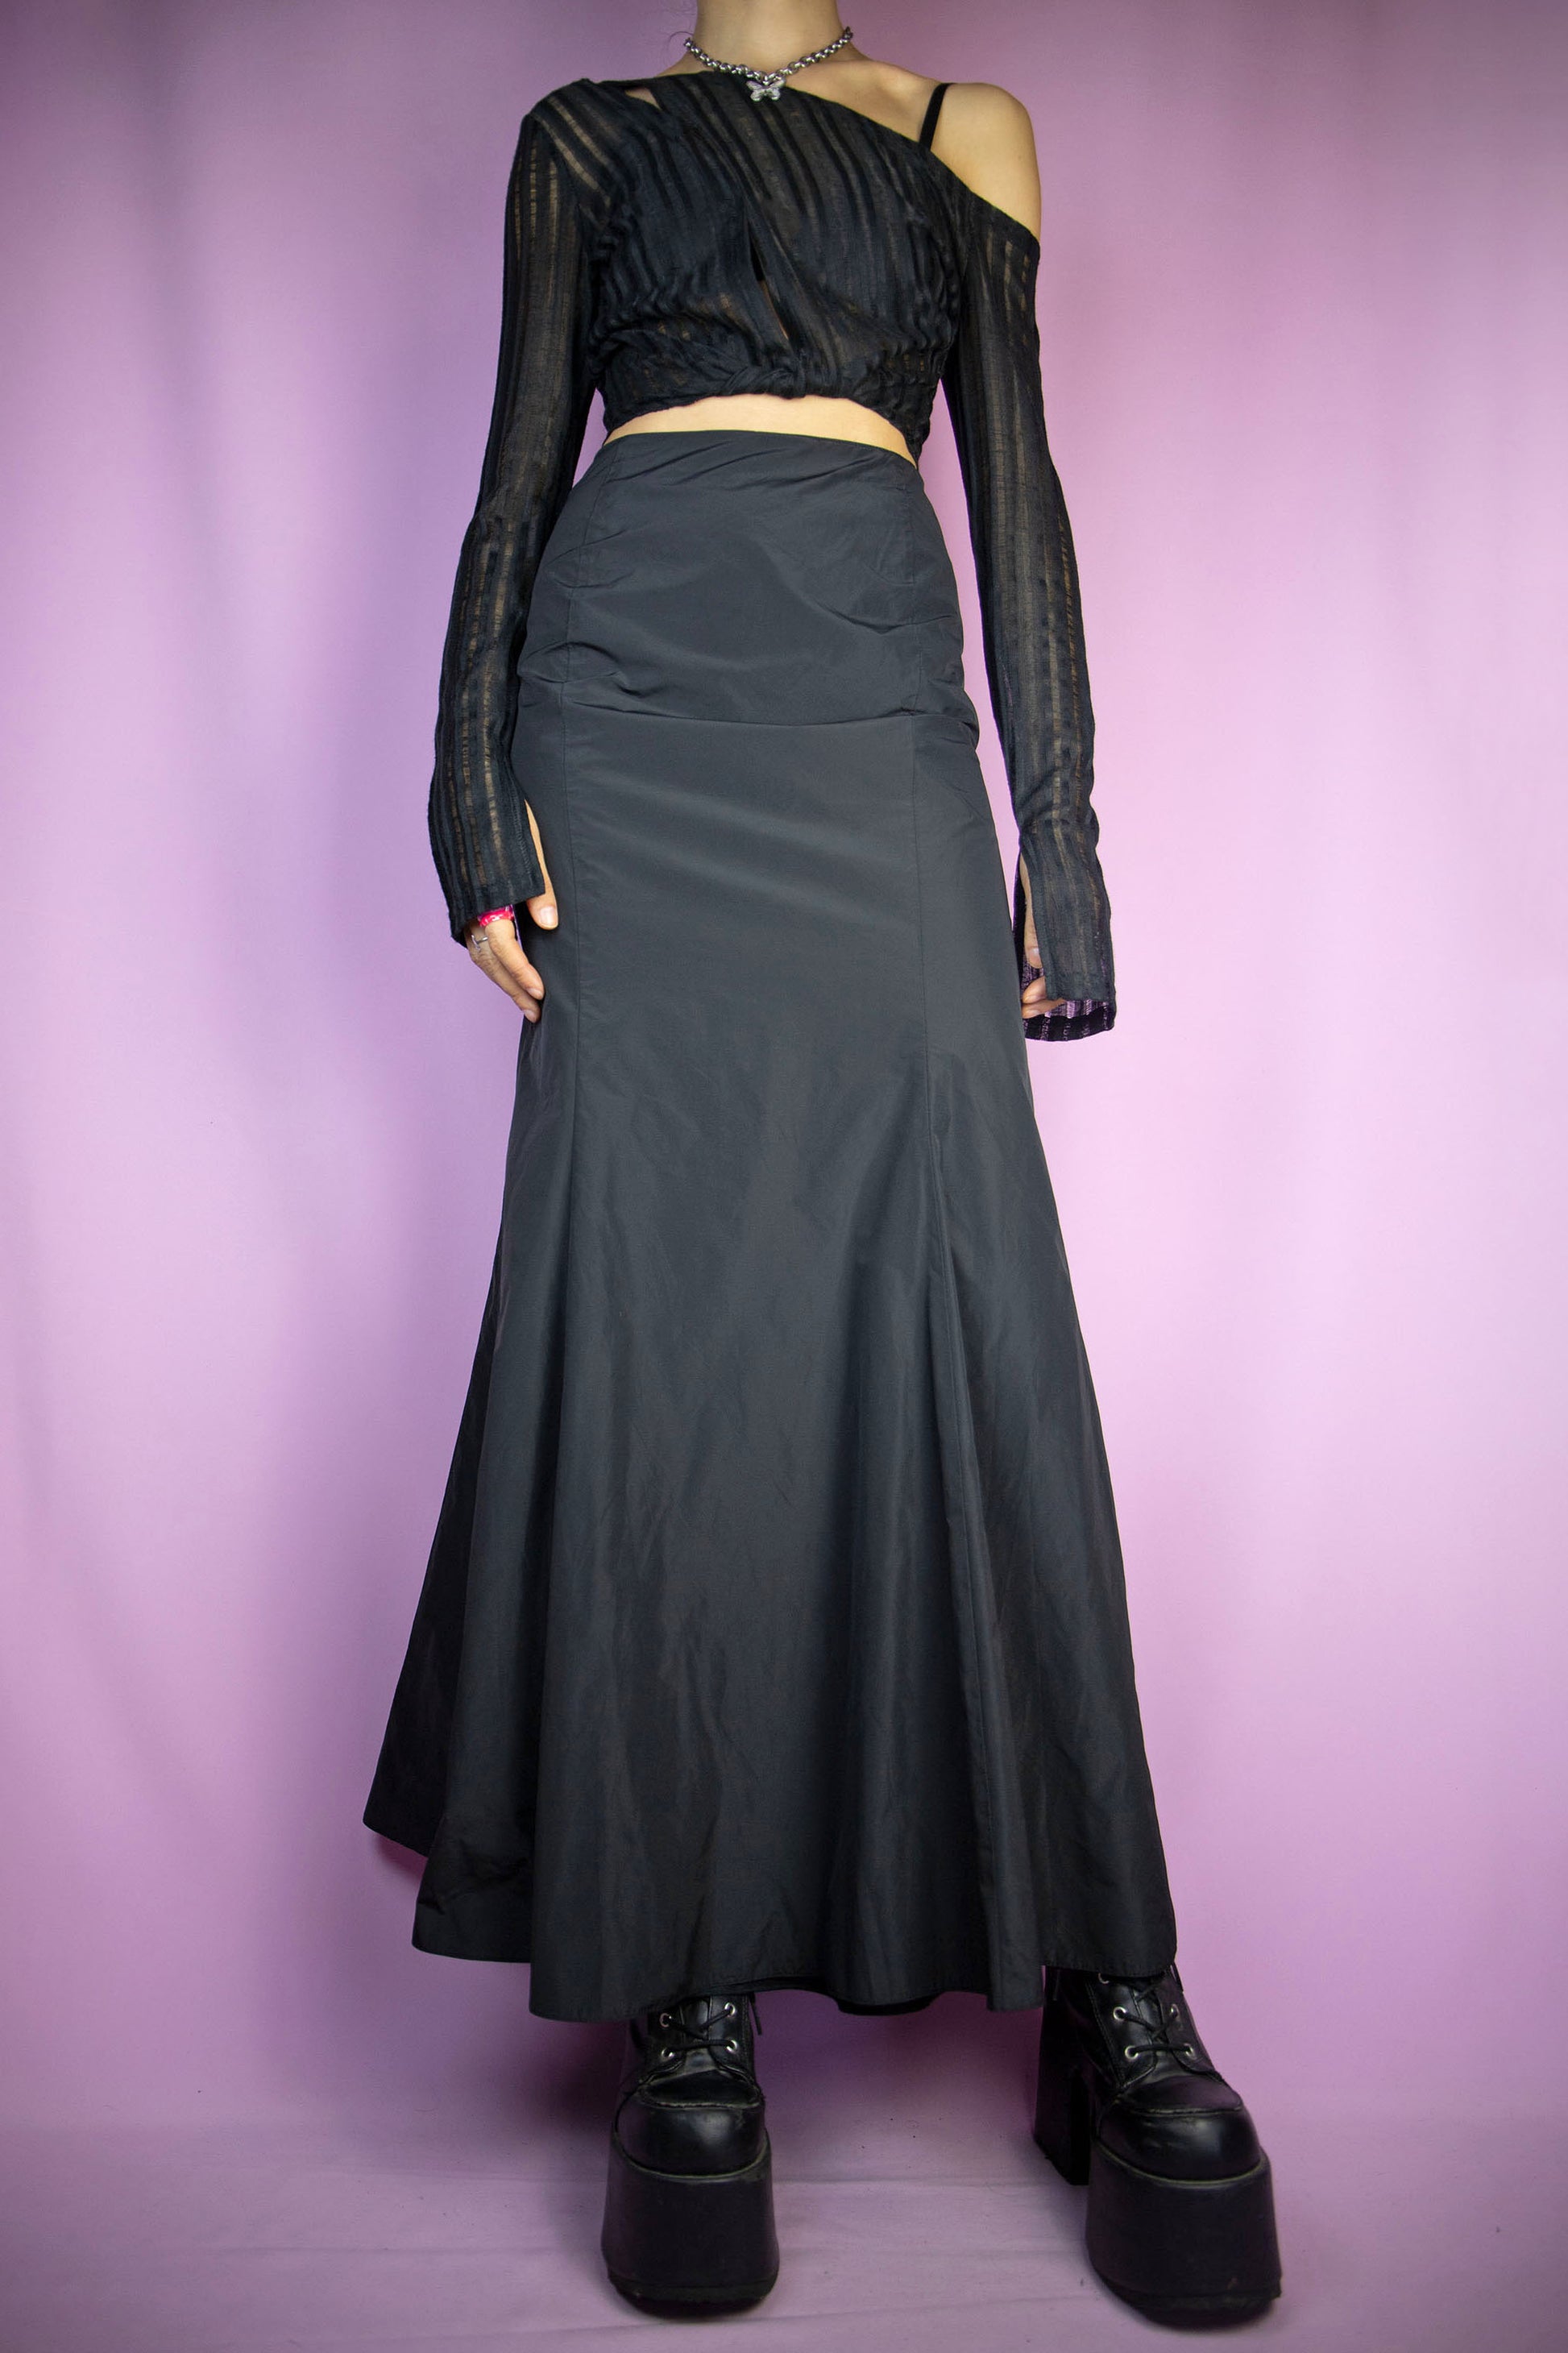 The Vintage 90's Black Mermaid Maxi Skirt is an exquisite long black skirt with a side zipper closure, perfect for cyber fairy goth party nights. This midi skirt captures the essence of 1990’s style.